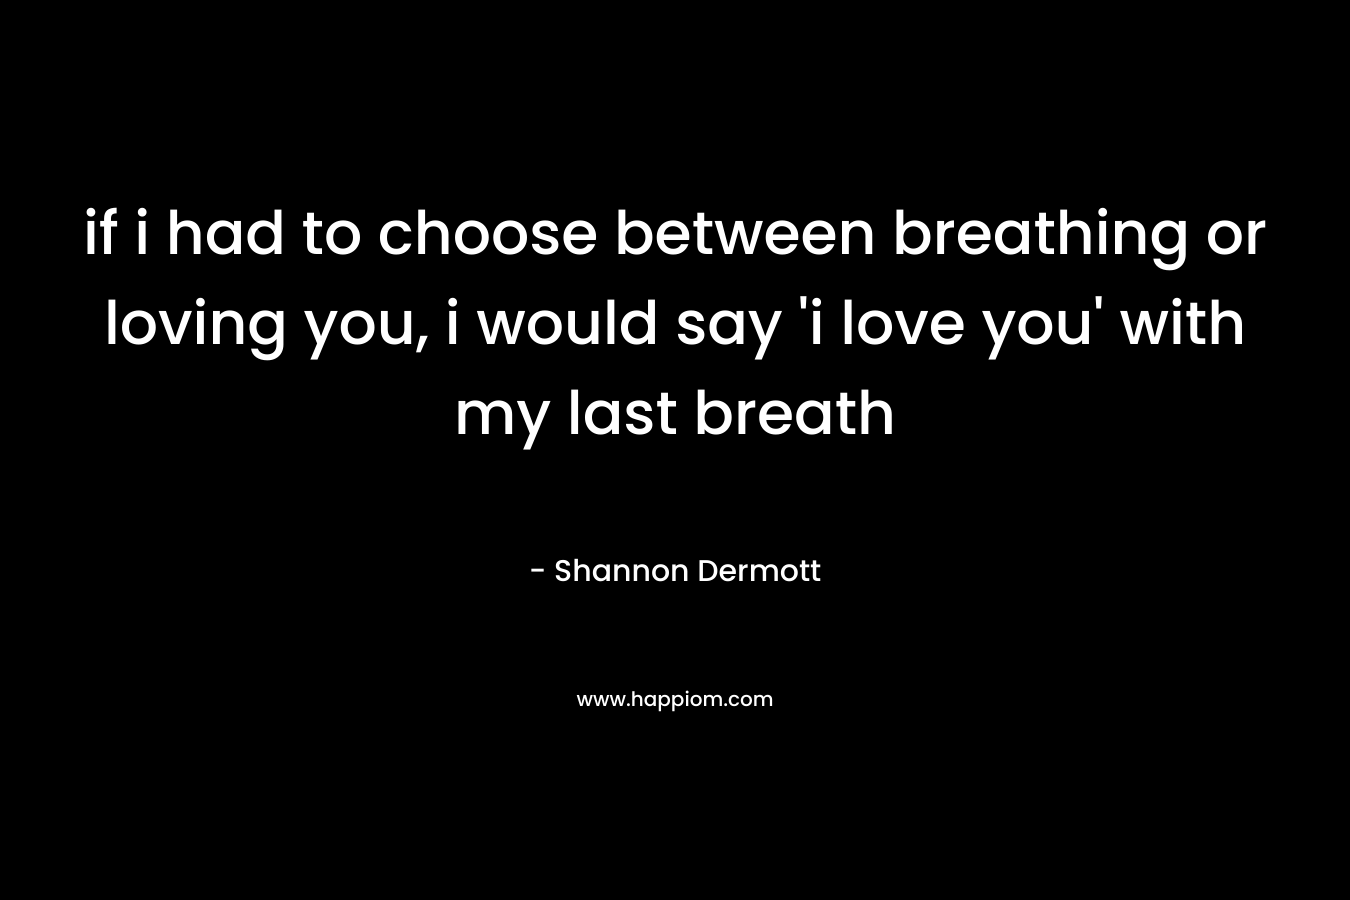 if i had to choose between breathing or loving you, i would say 'i love you' with my last breath